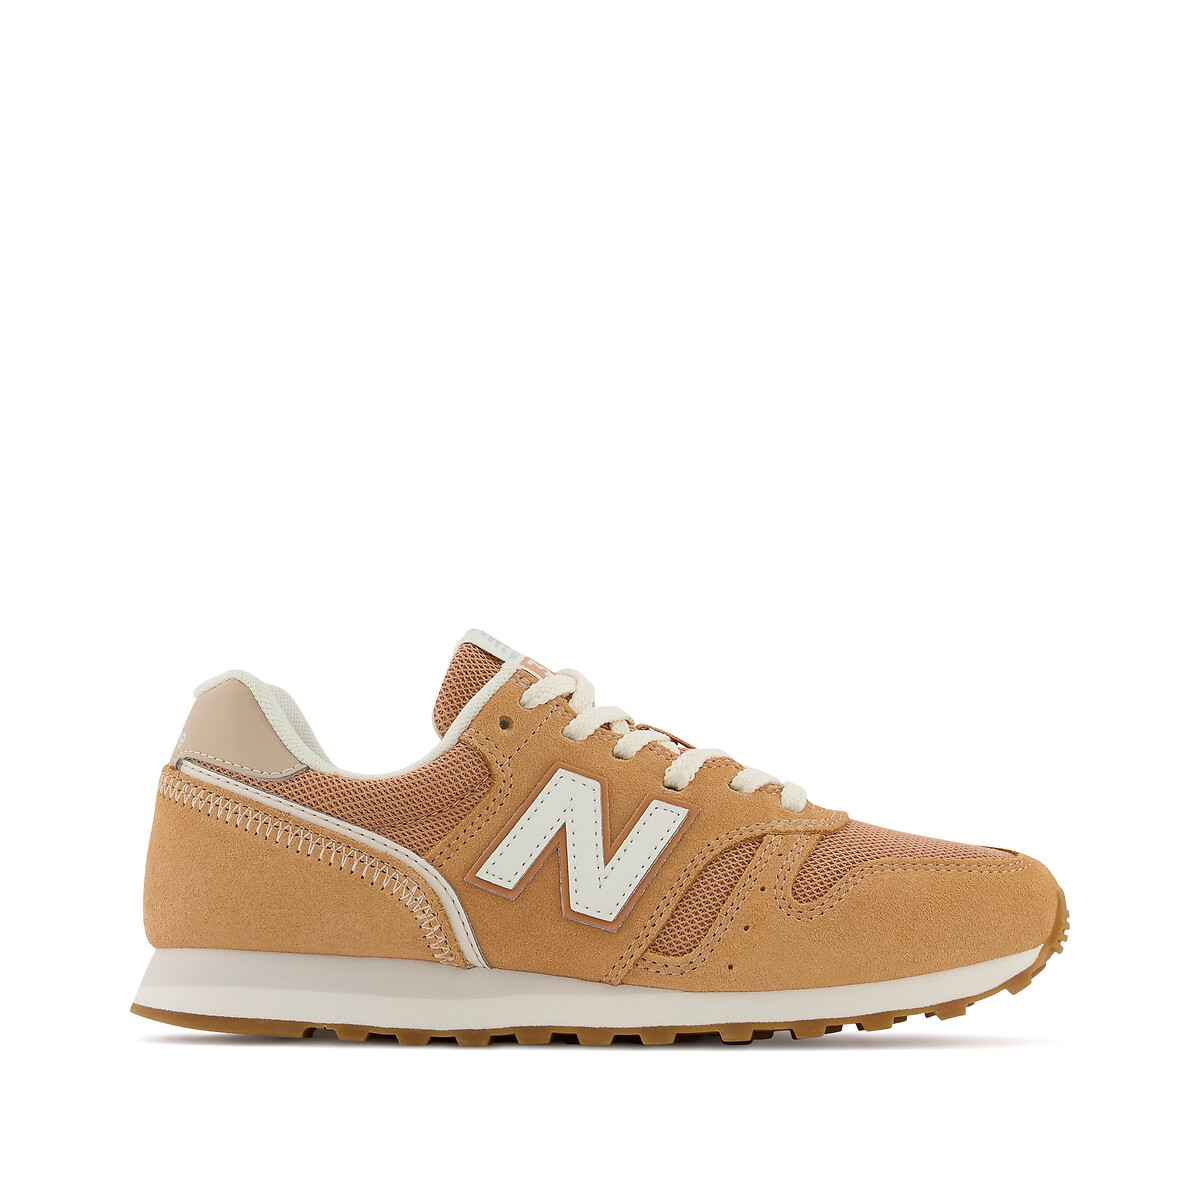 Wl373 suede trainers , caramel, New Balance | La Redoute